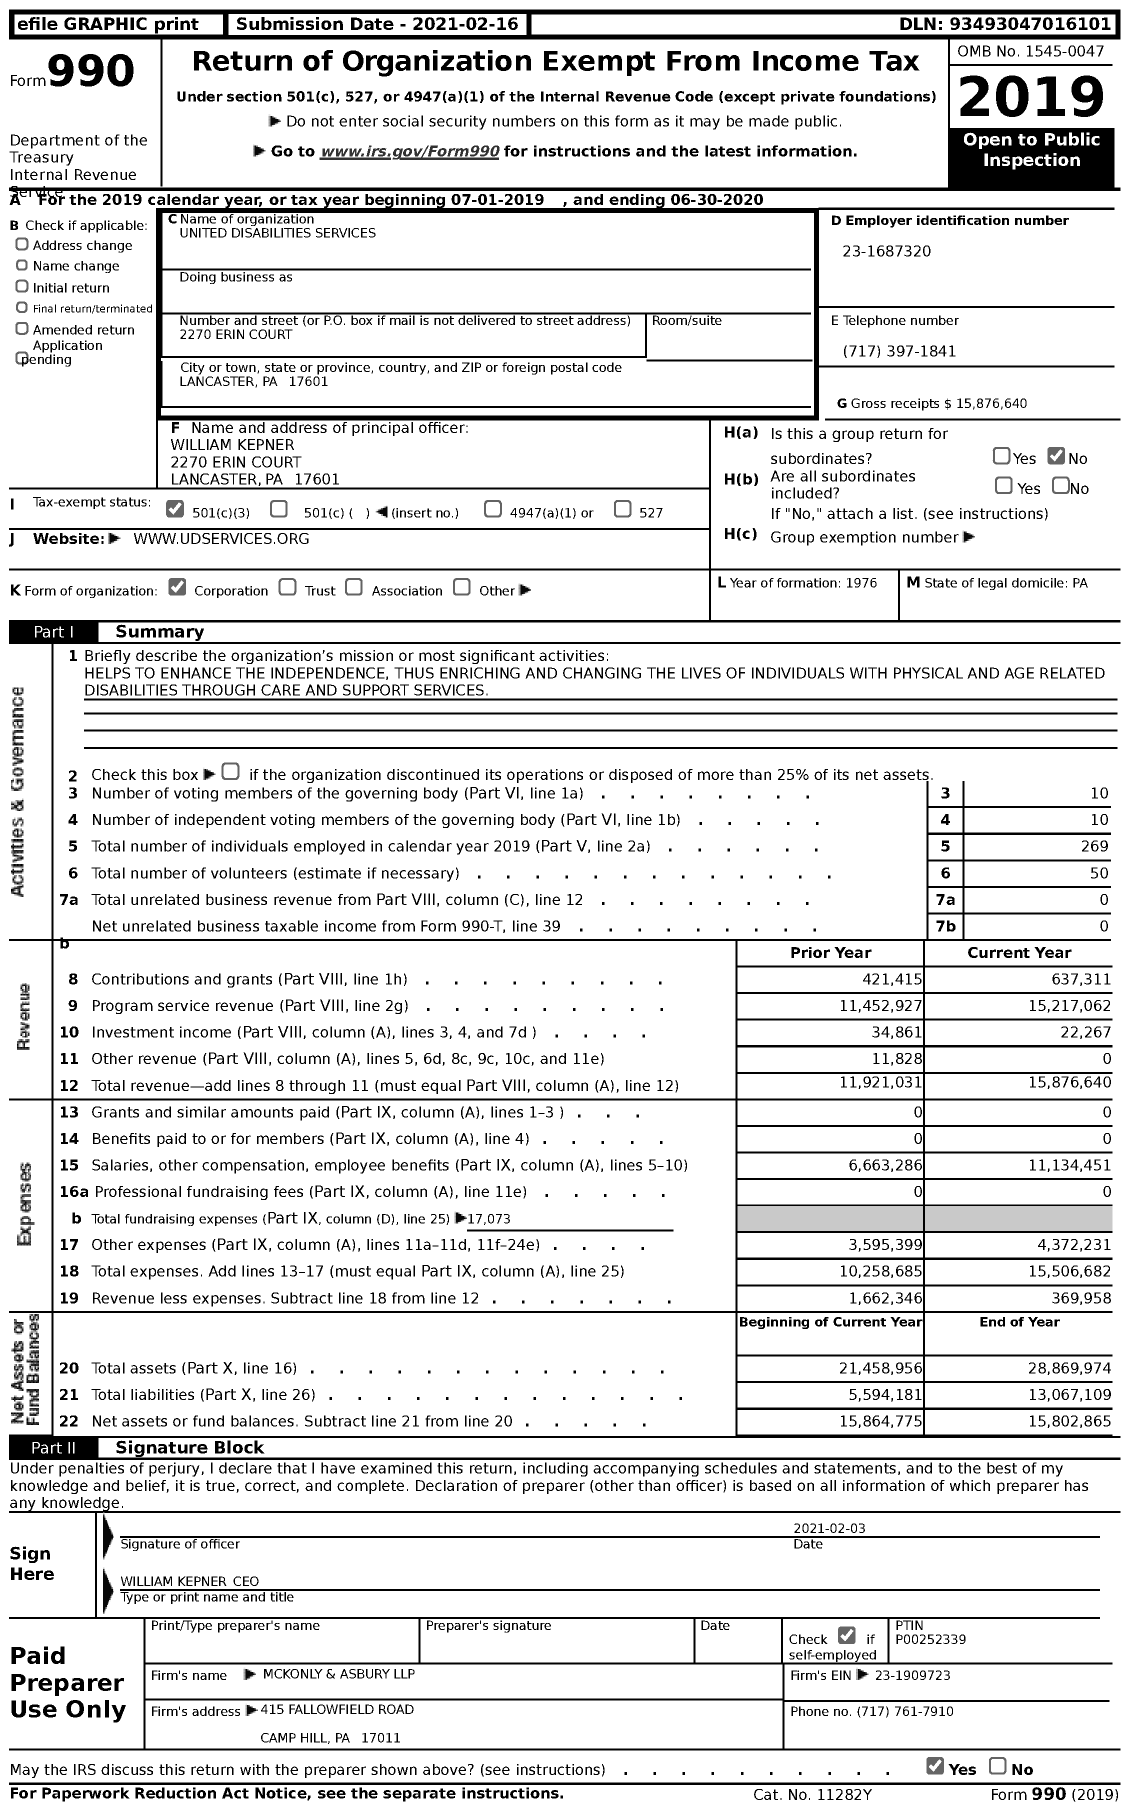 Image of first page of 2019 Form 990 for United Disabilities Services (UDS)